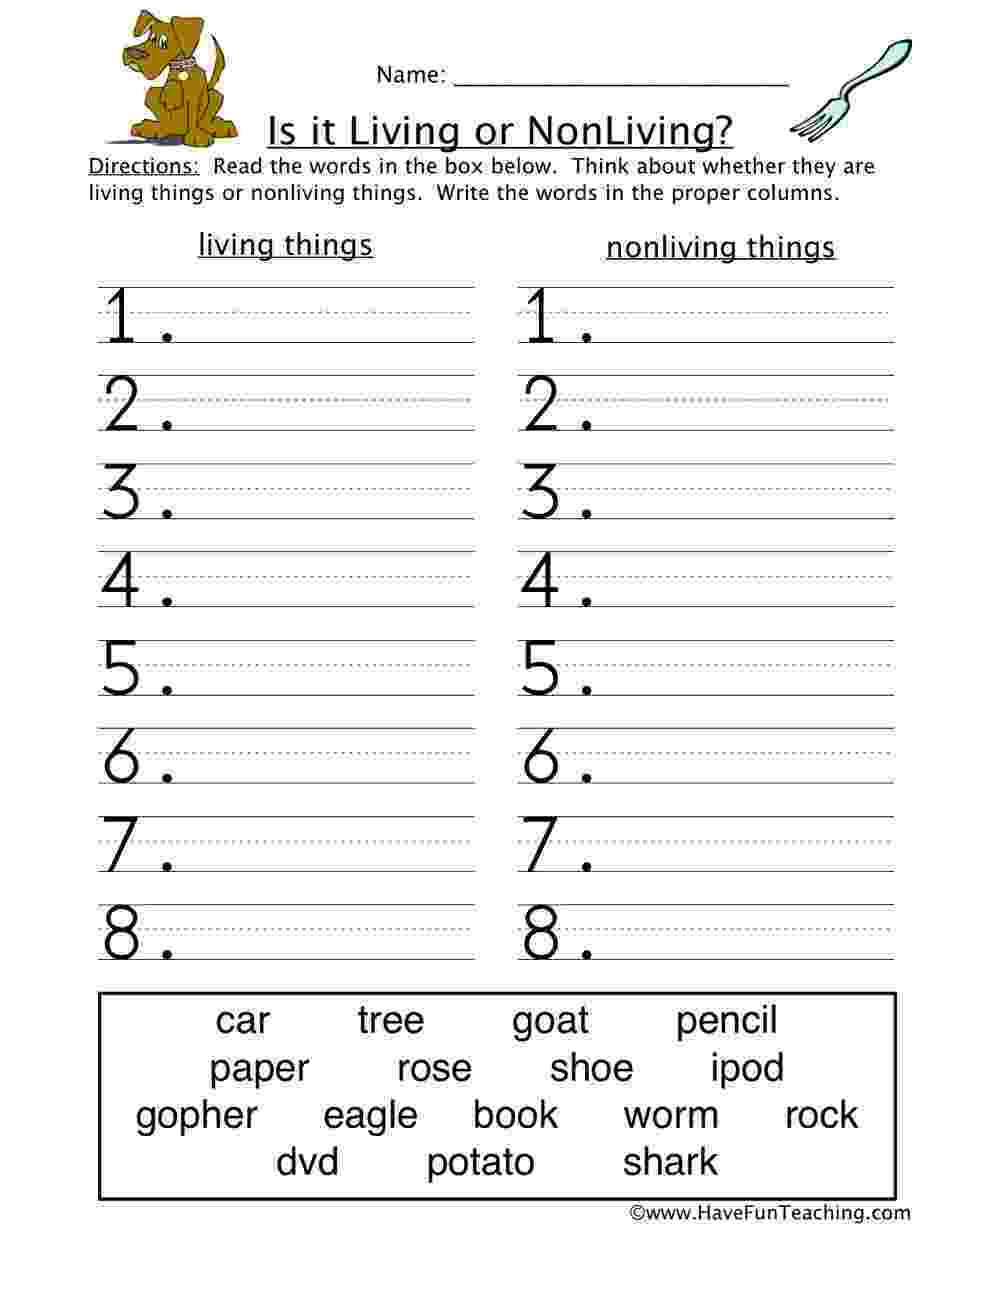 science worksheets for grade 1 living and nonliving things living things worksheet worksheets living things and science for nonliving worksheets grade 1 